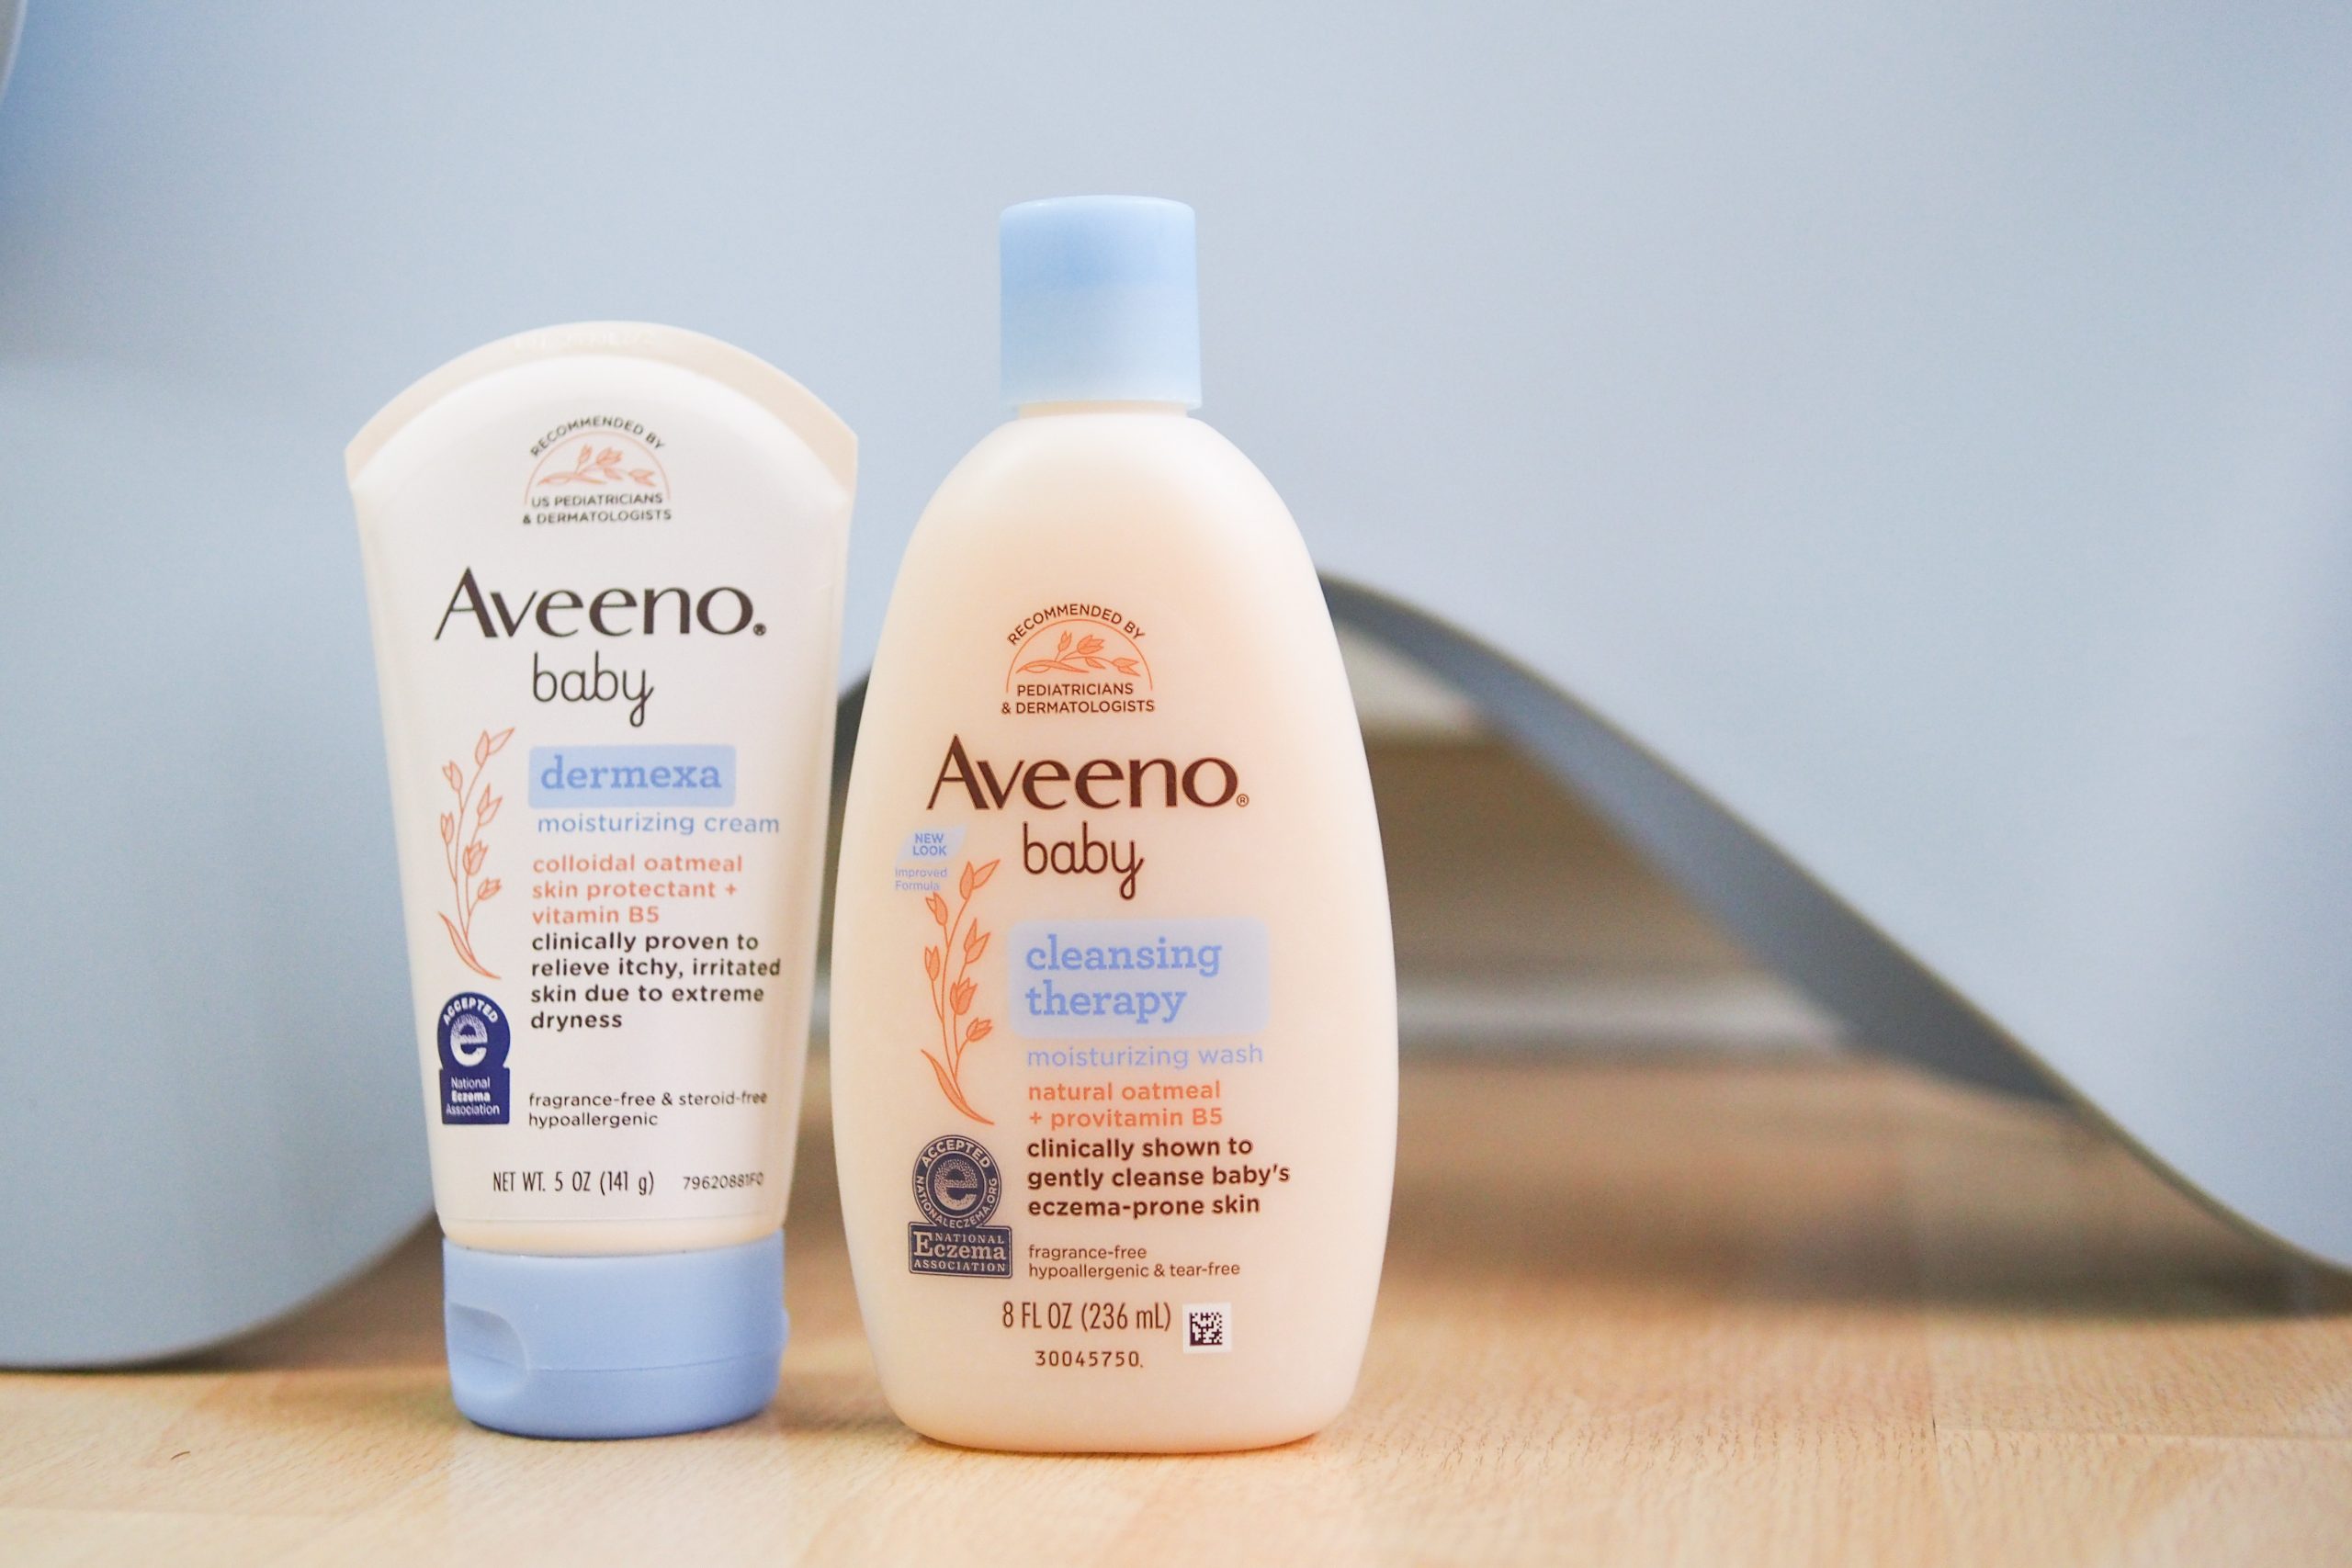 Celebrate #NationalEczemaAwarenessMonth with Shopee and Aveeno – Get up to 30% off today!